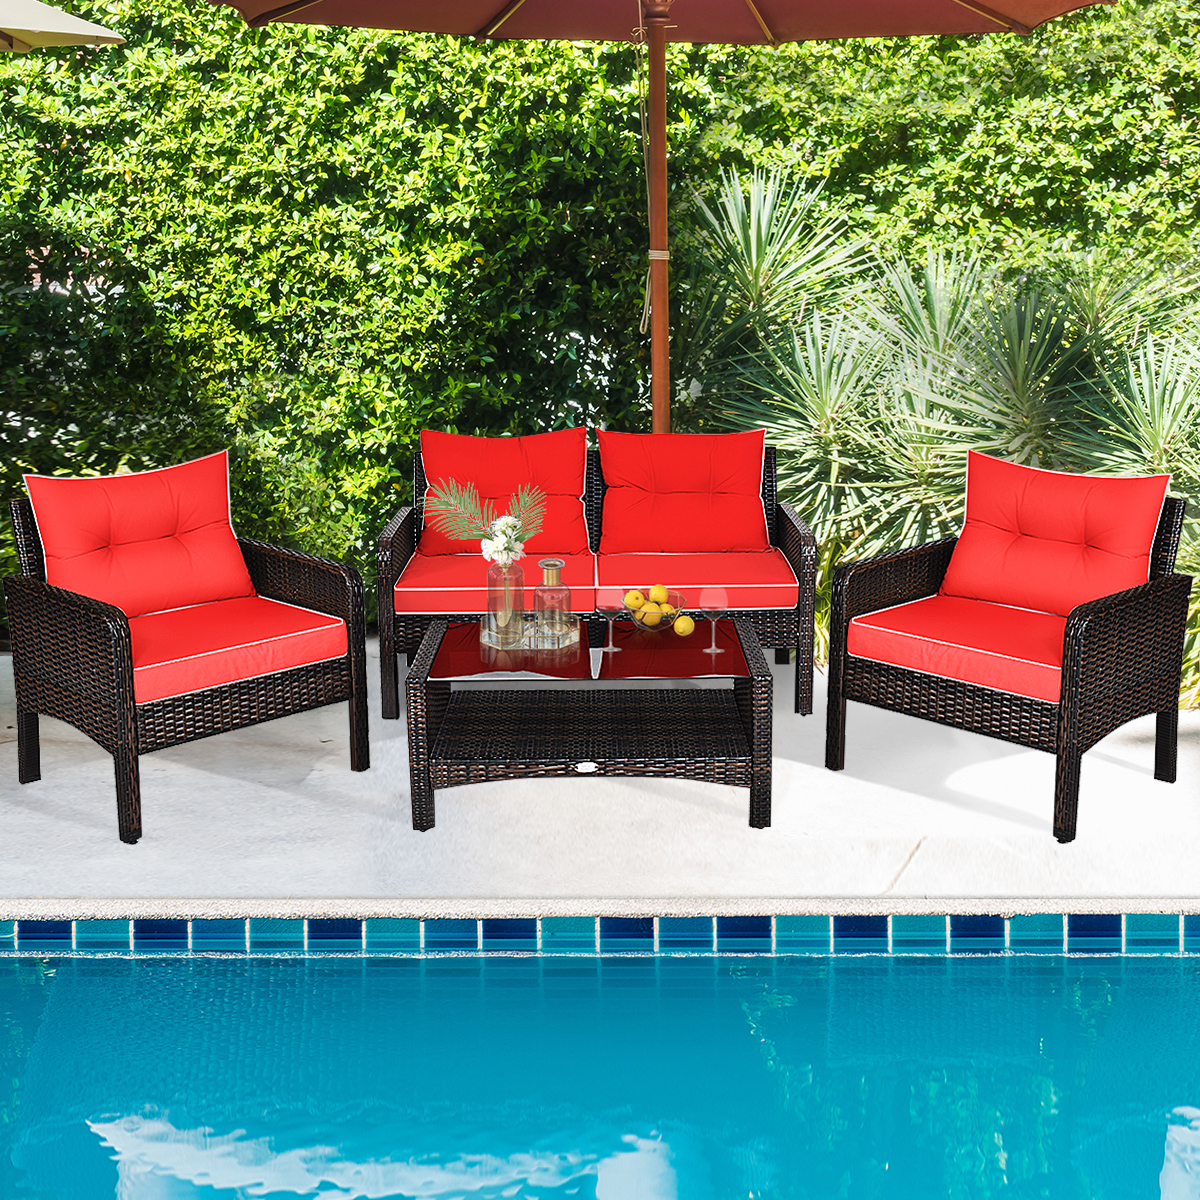 Gymax 4PCS Rattan Patio Conversation Set Red Cushioned Outdoor Furniture Set - image 1 of 9